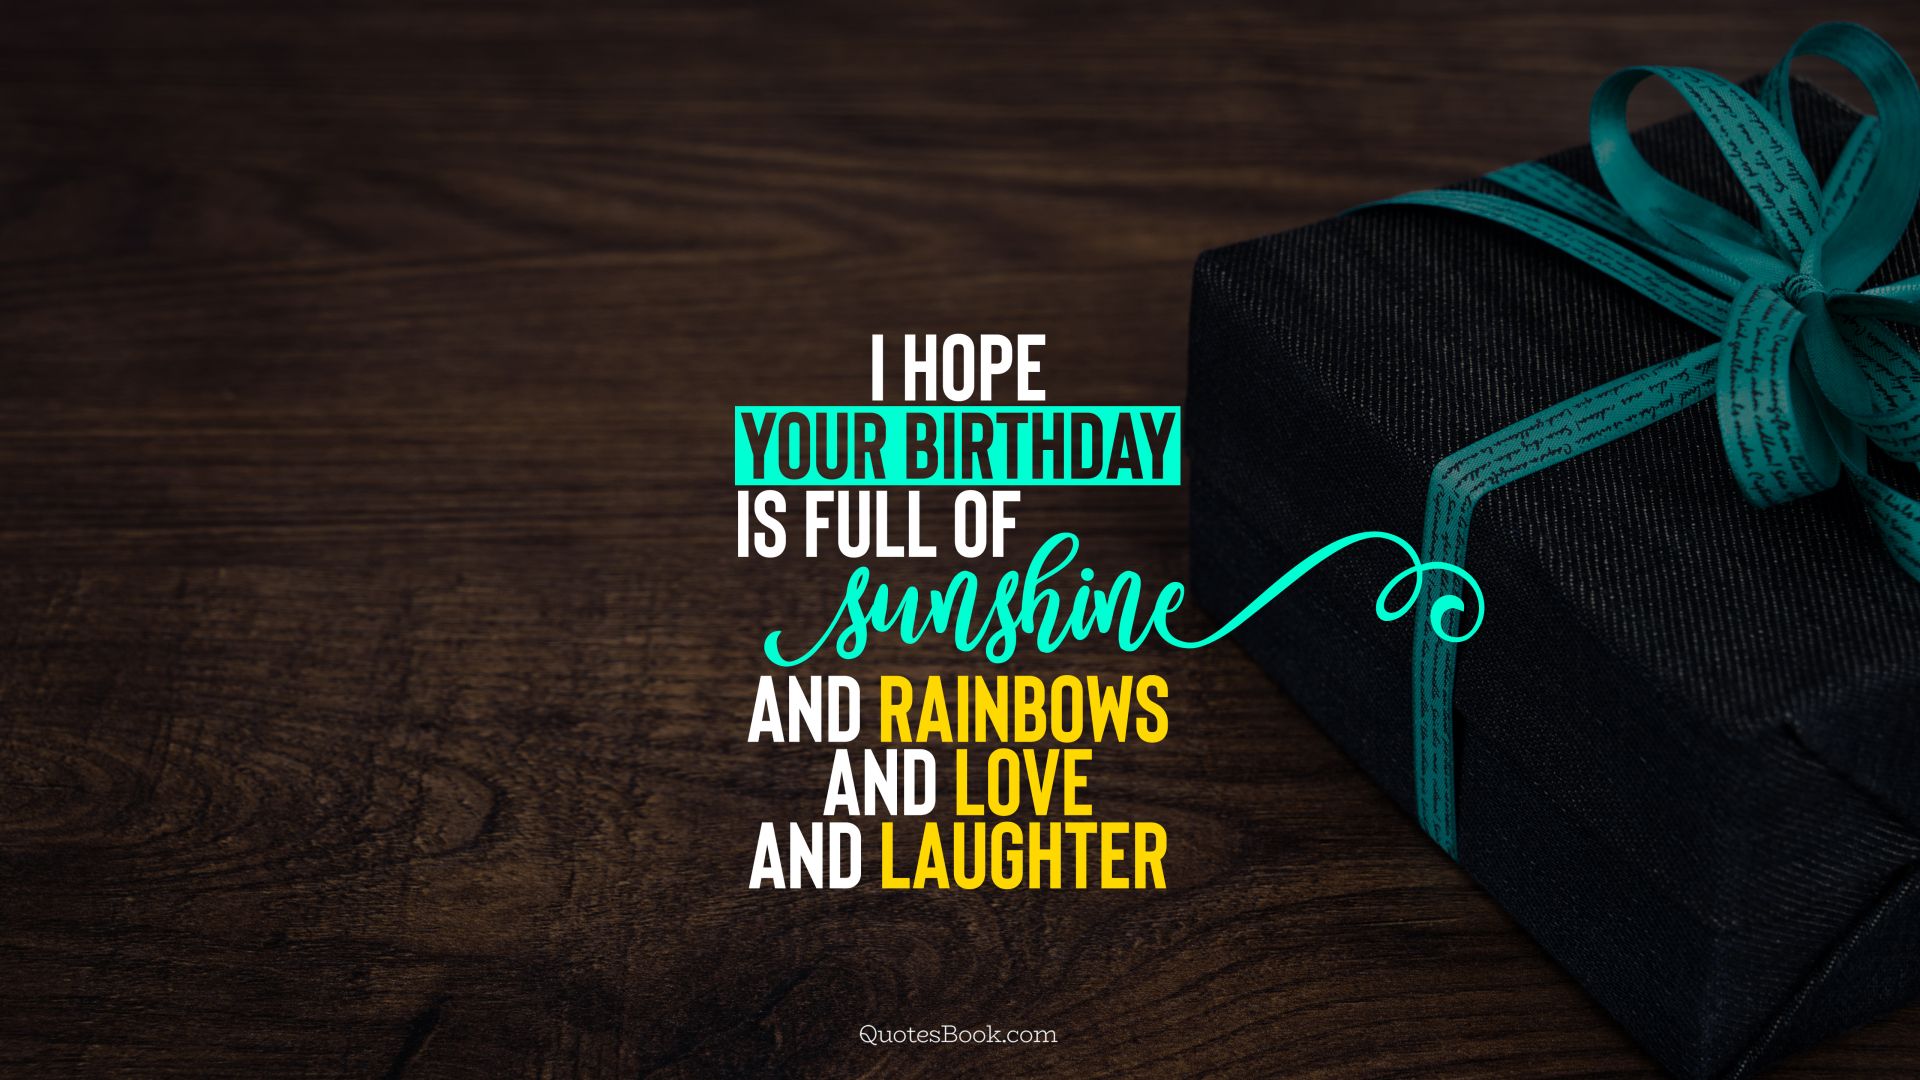 I hope your birthday is full of sunshine and rainbows and love and laughter